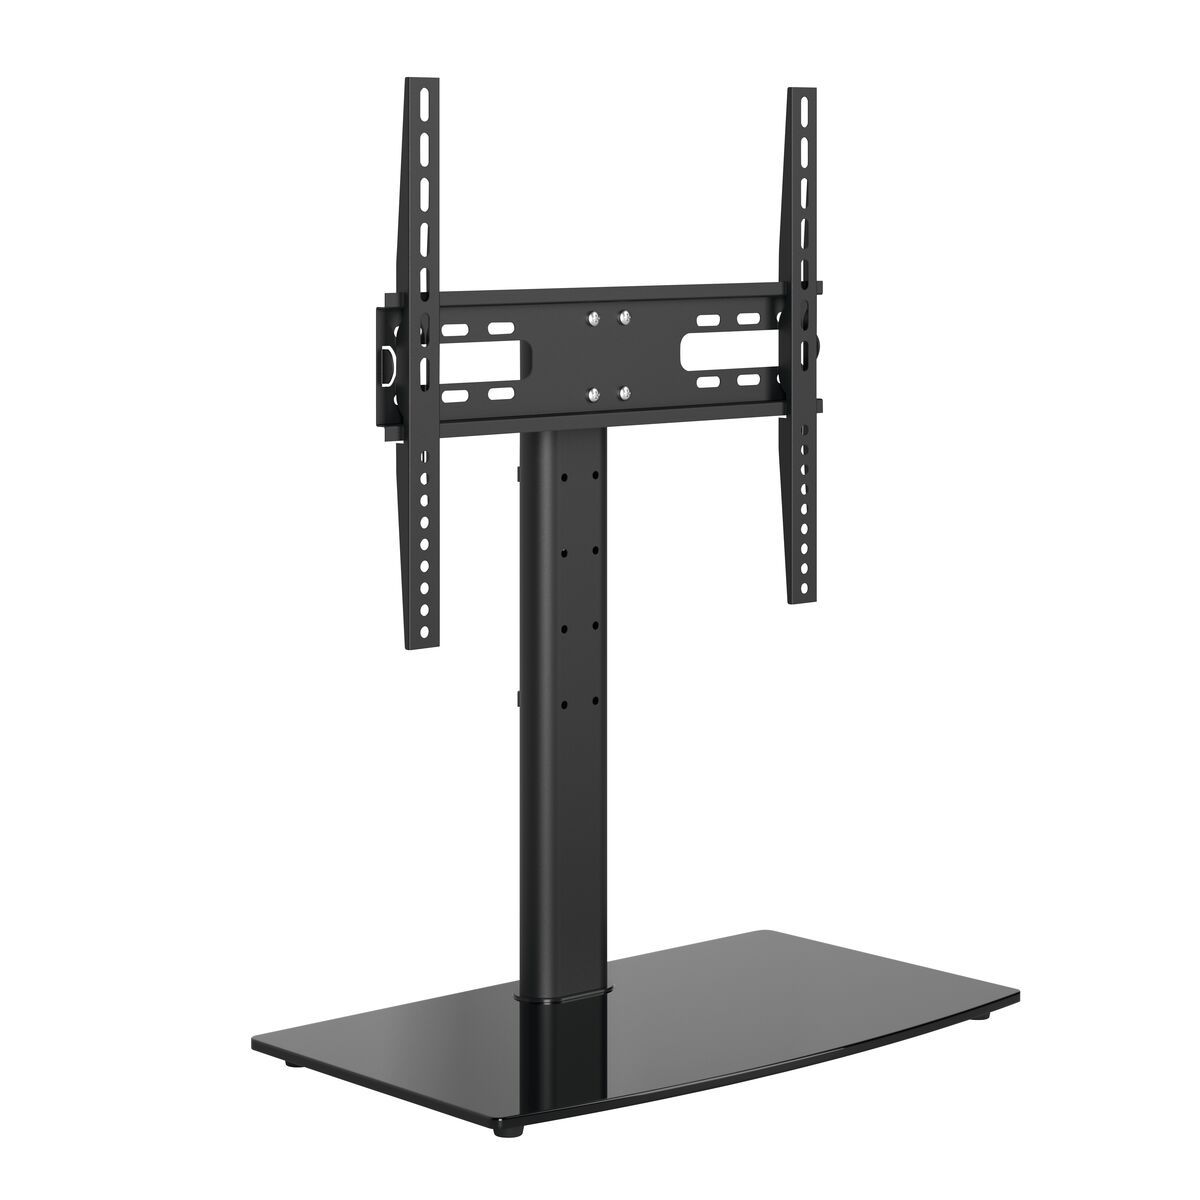 Vogel's MS3085 Tabletop TV stand - Suitable for 32 up to 65 inch TVs - Product